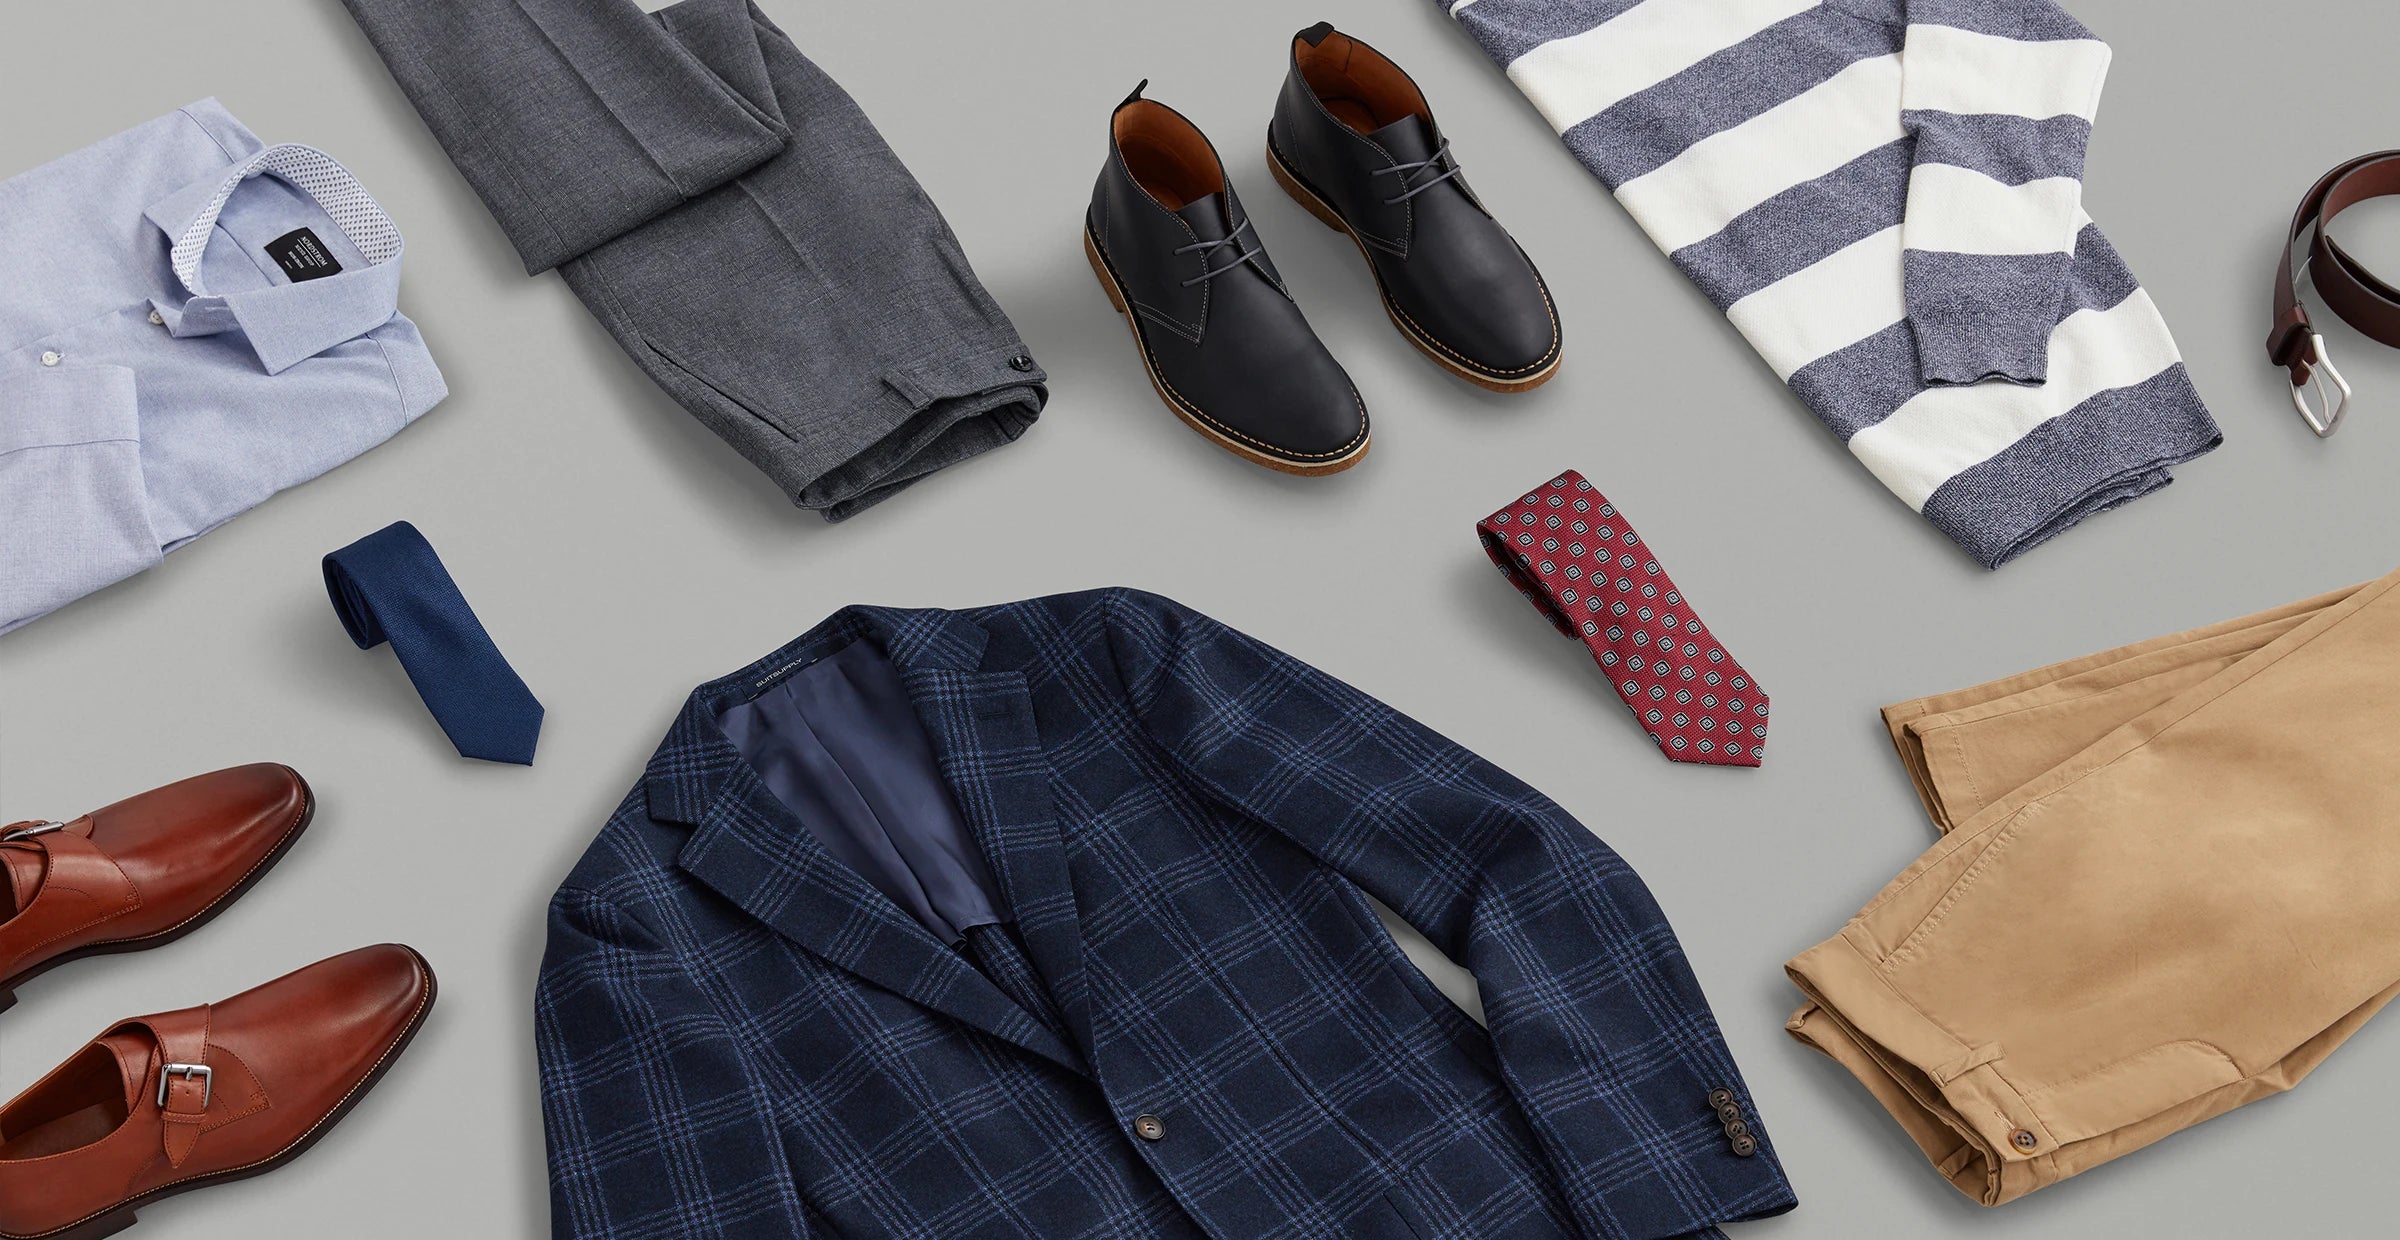 10 Must-Have Items For Men To Look Fresh And Professional